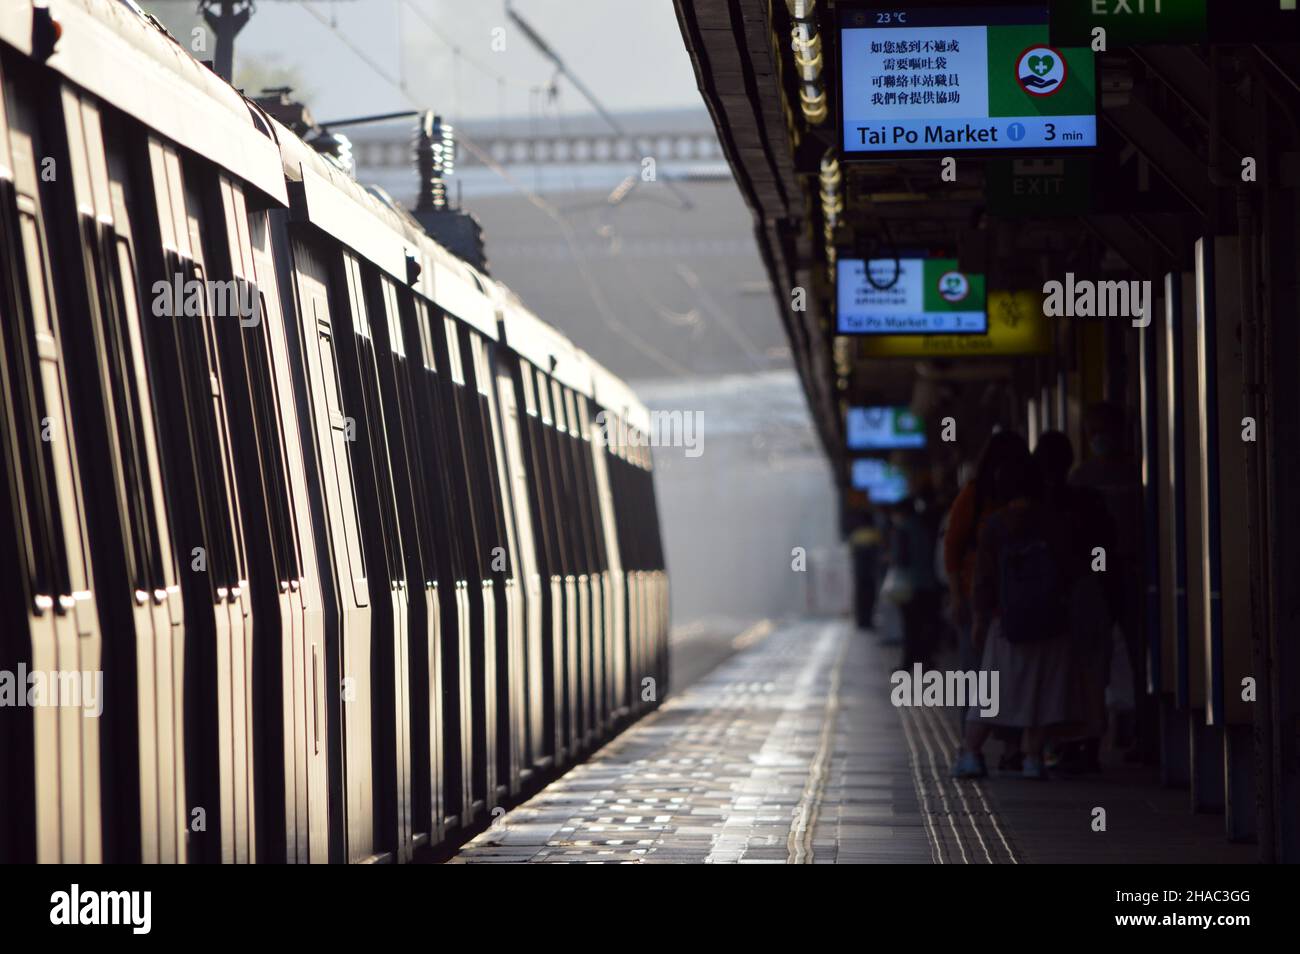 Metro Cammell EMU at Tai Wai Station of the East Rail Line of the MTR system, Hong Kong Stock Photo